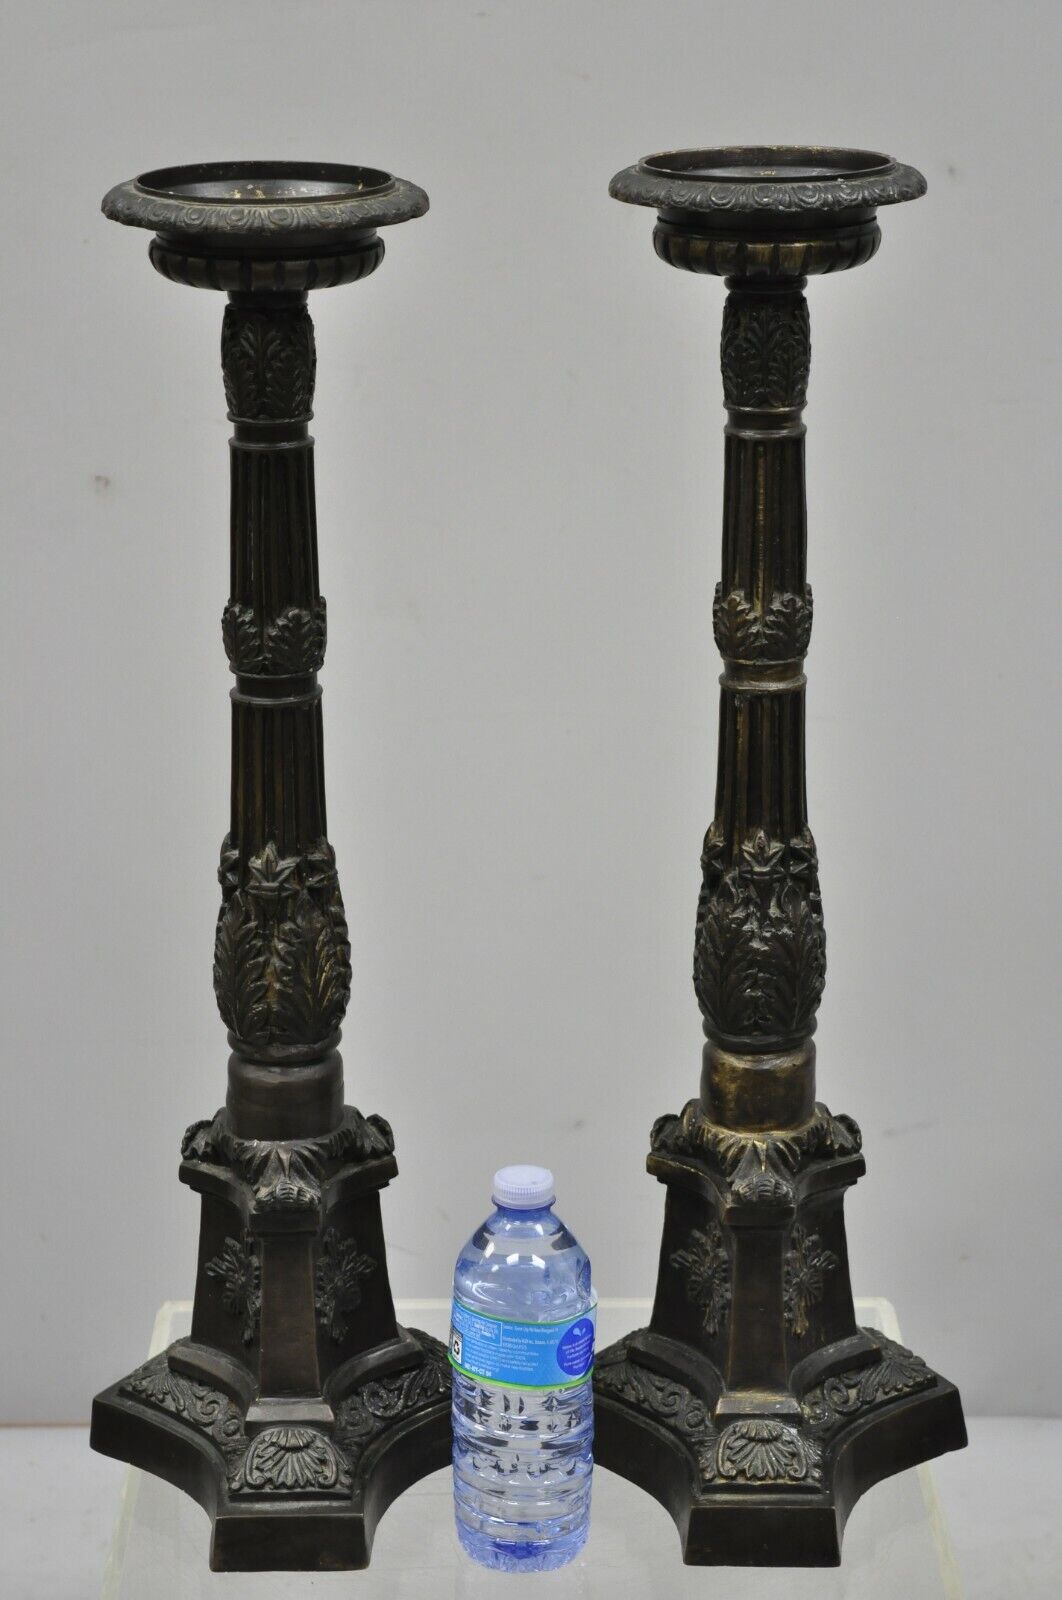 Pair of 26" Brass French Empire Style Candlestick Prickets Candle Holder